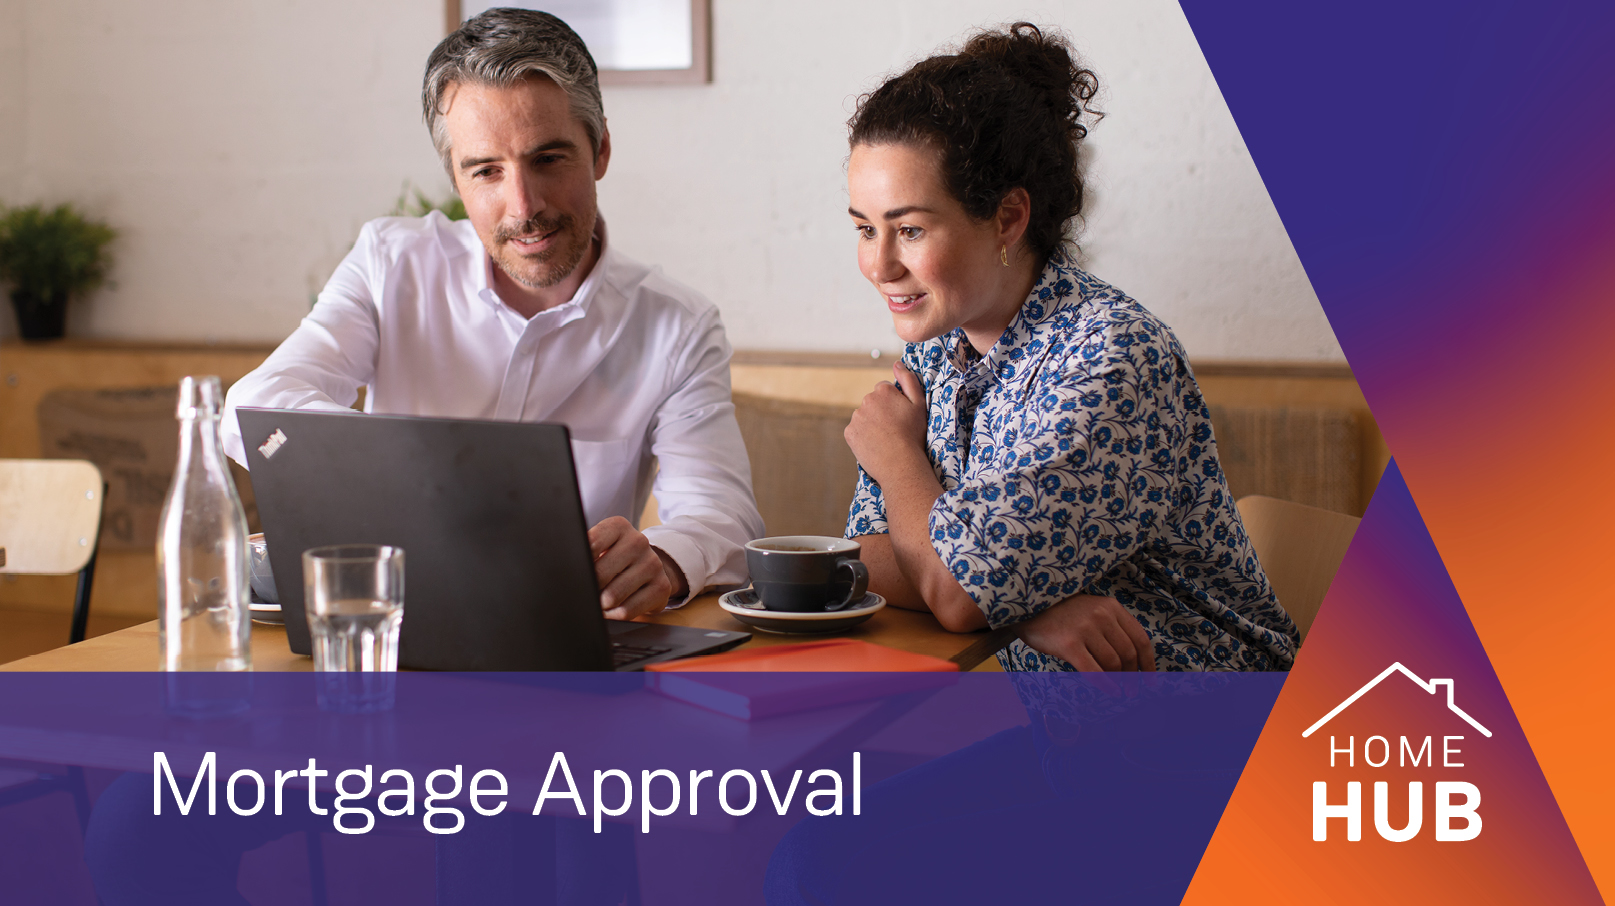 Mortgage Approval: When you’re ready to apply, we’re with you every step of the way